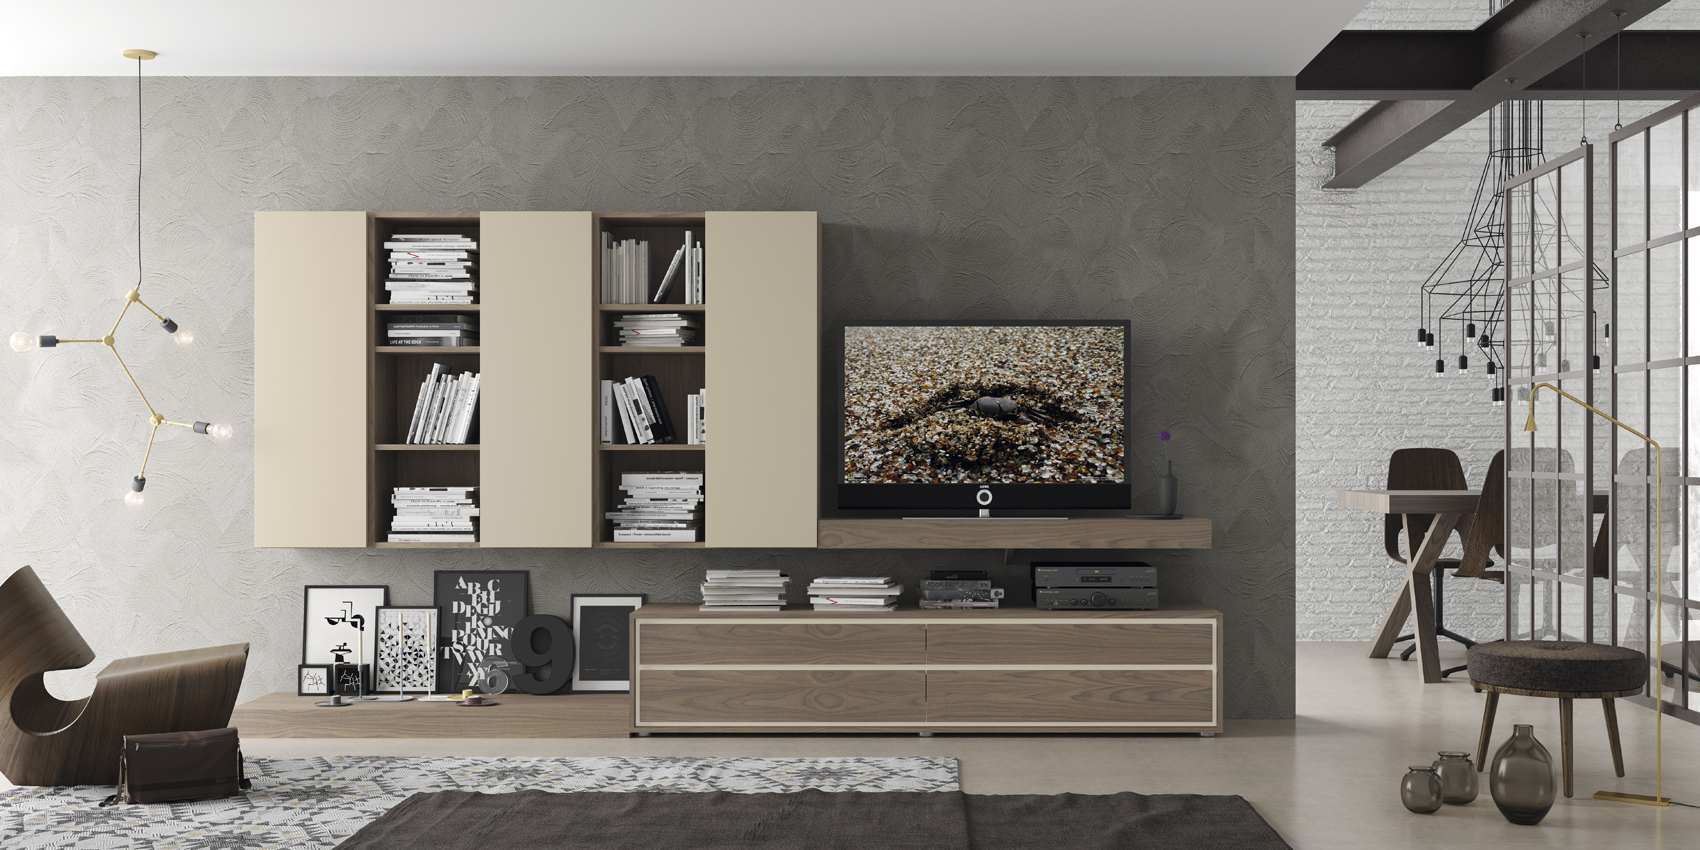 Brands MSC Modern Wall Unit, Italy Composition L4